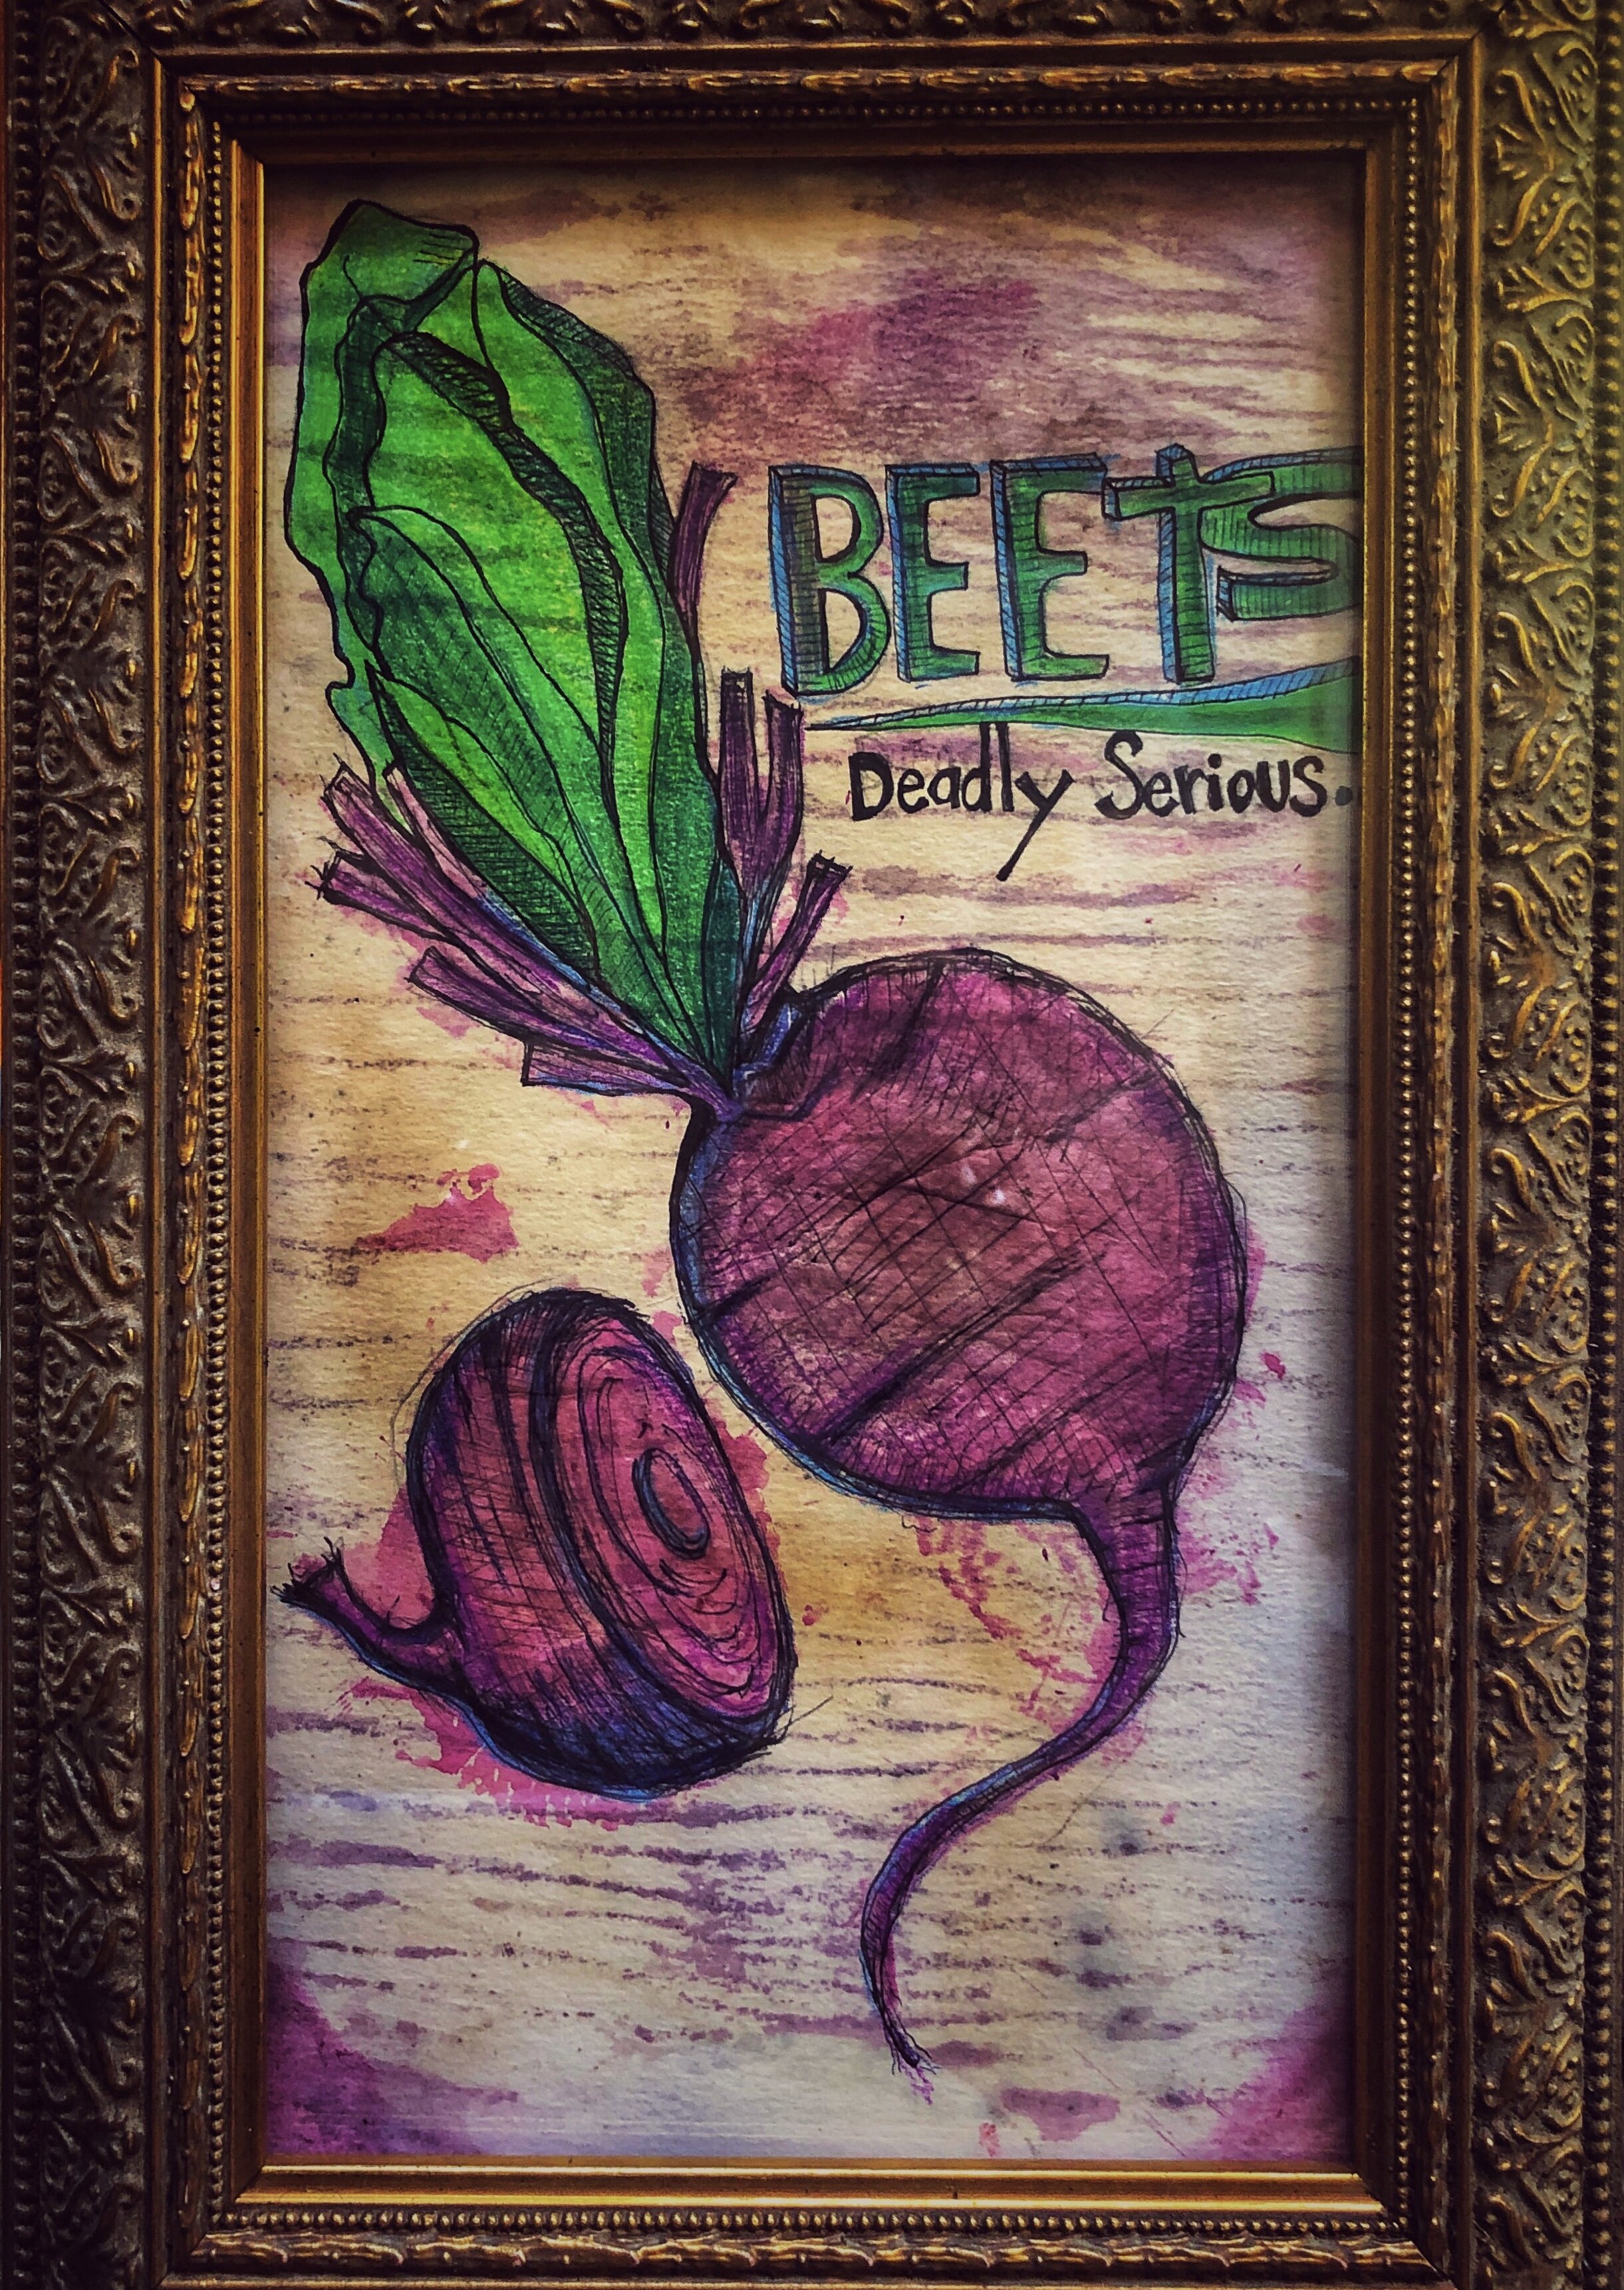 "Beets Are Deadly Serious" by Farrah Hoffmire